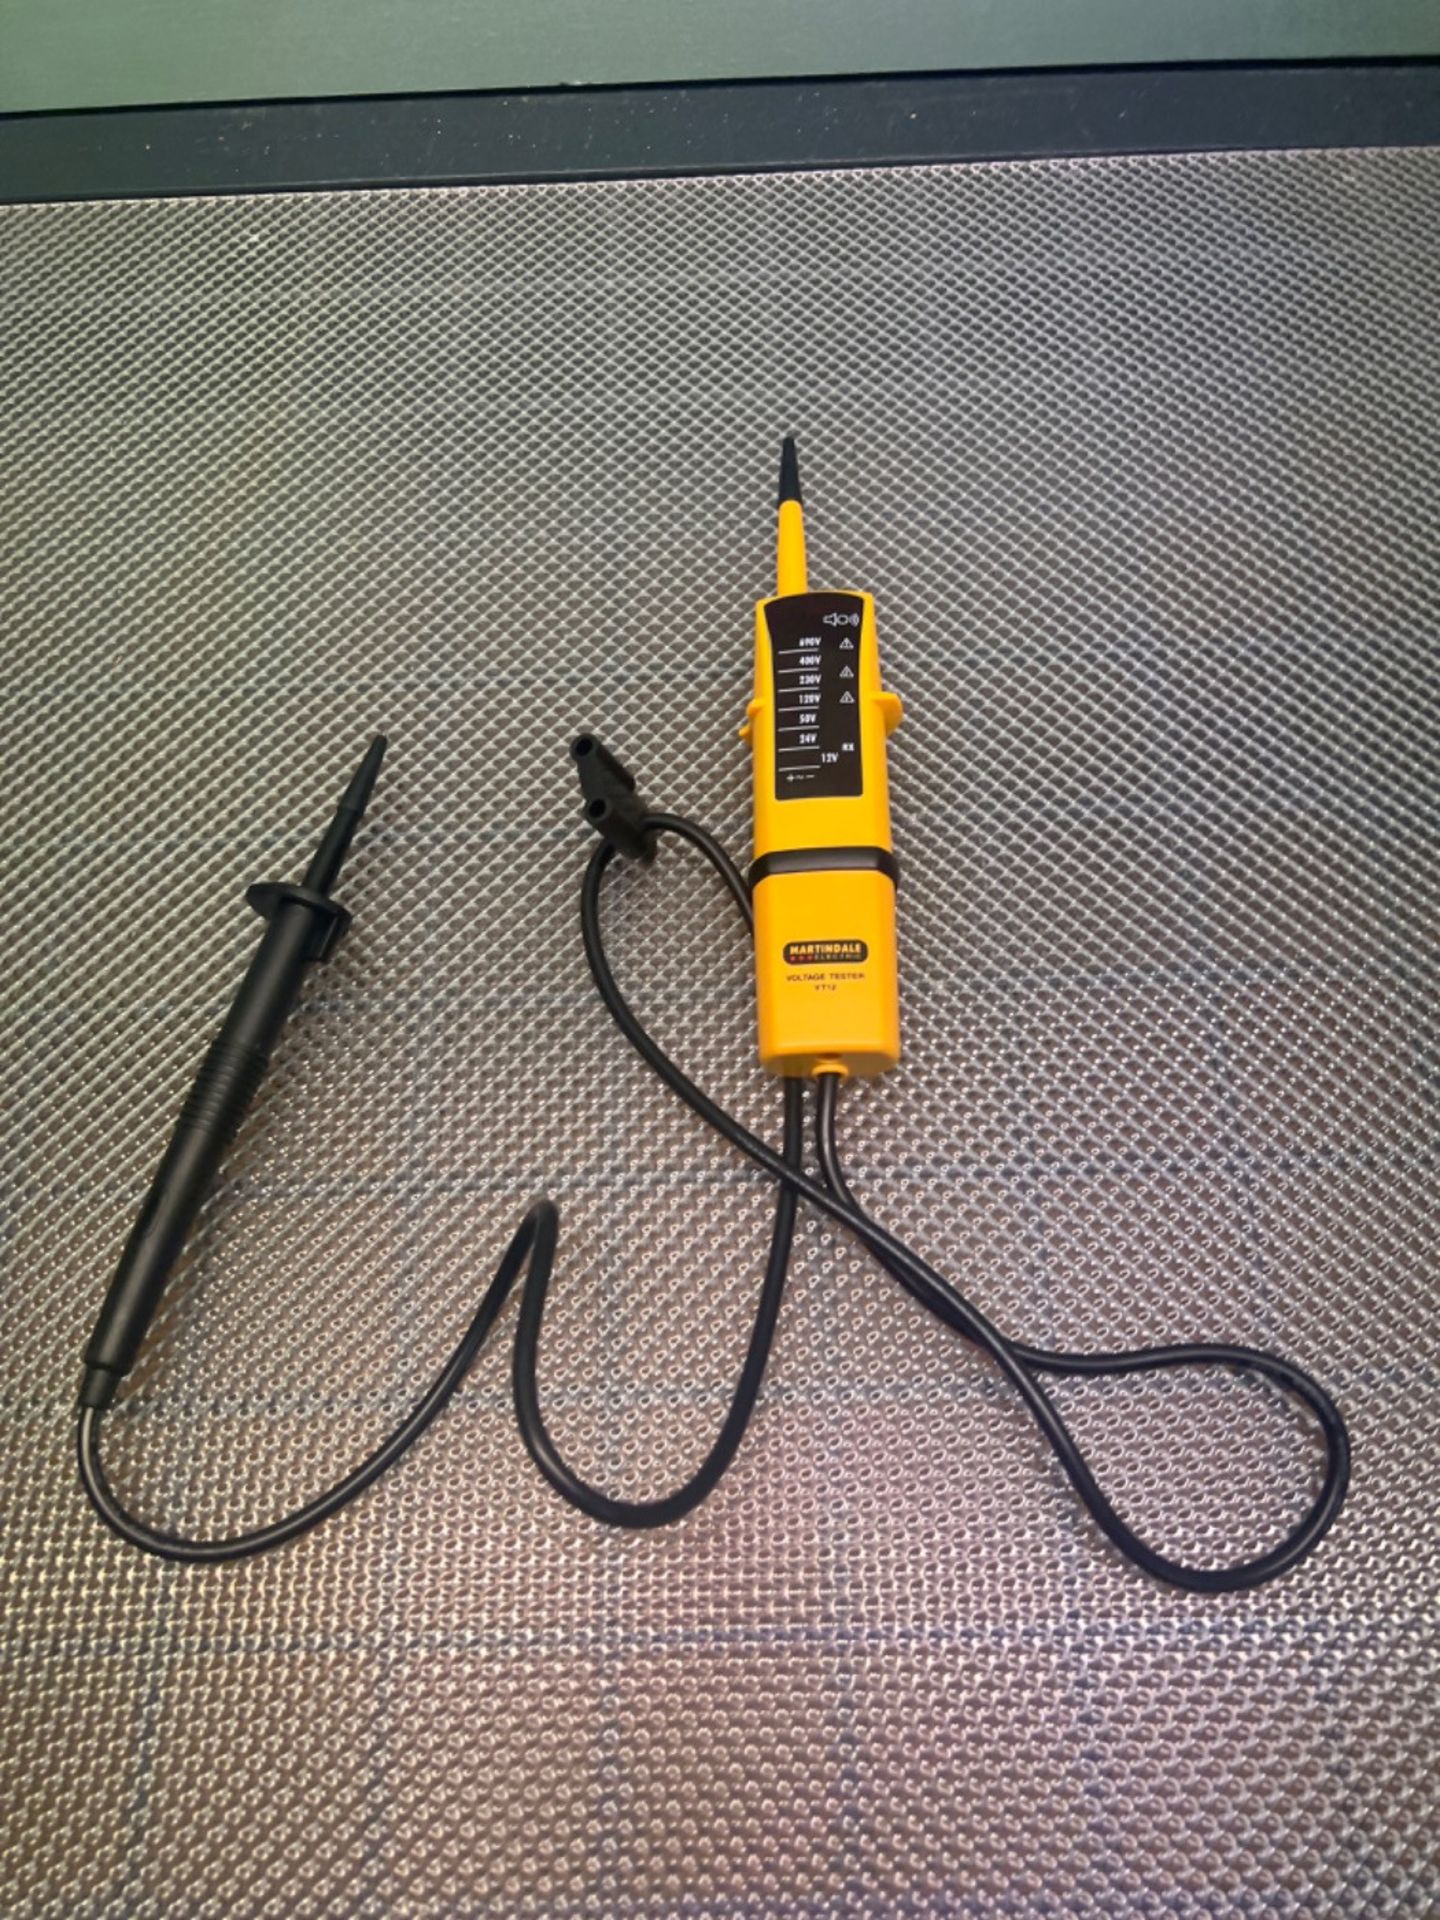 Martindale VT12 Two Pole Voltage and Continuity Tester, Yellow - Image 2 of 2